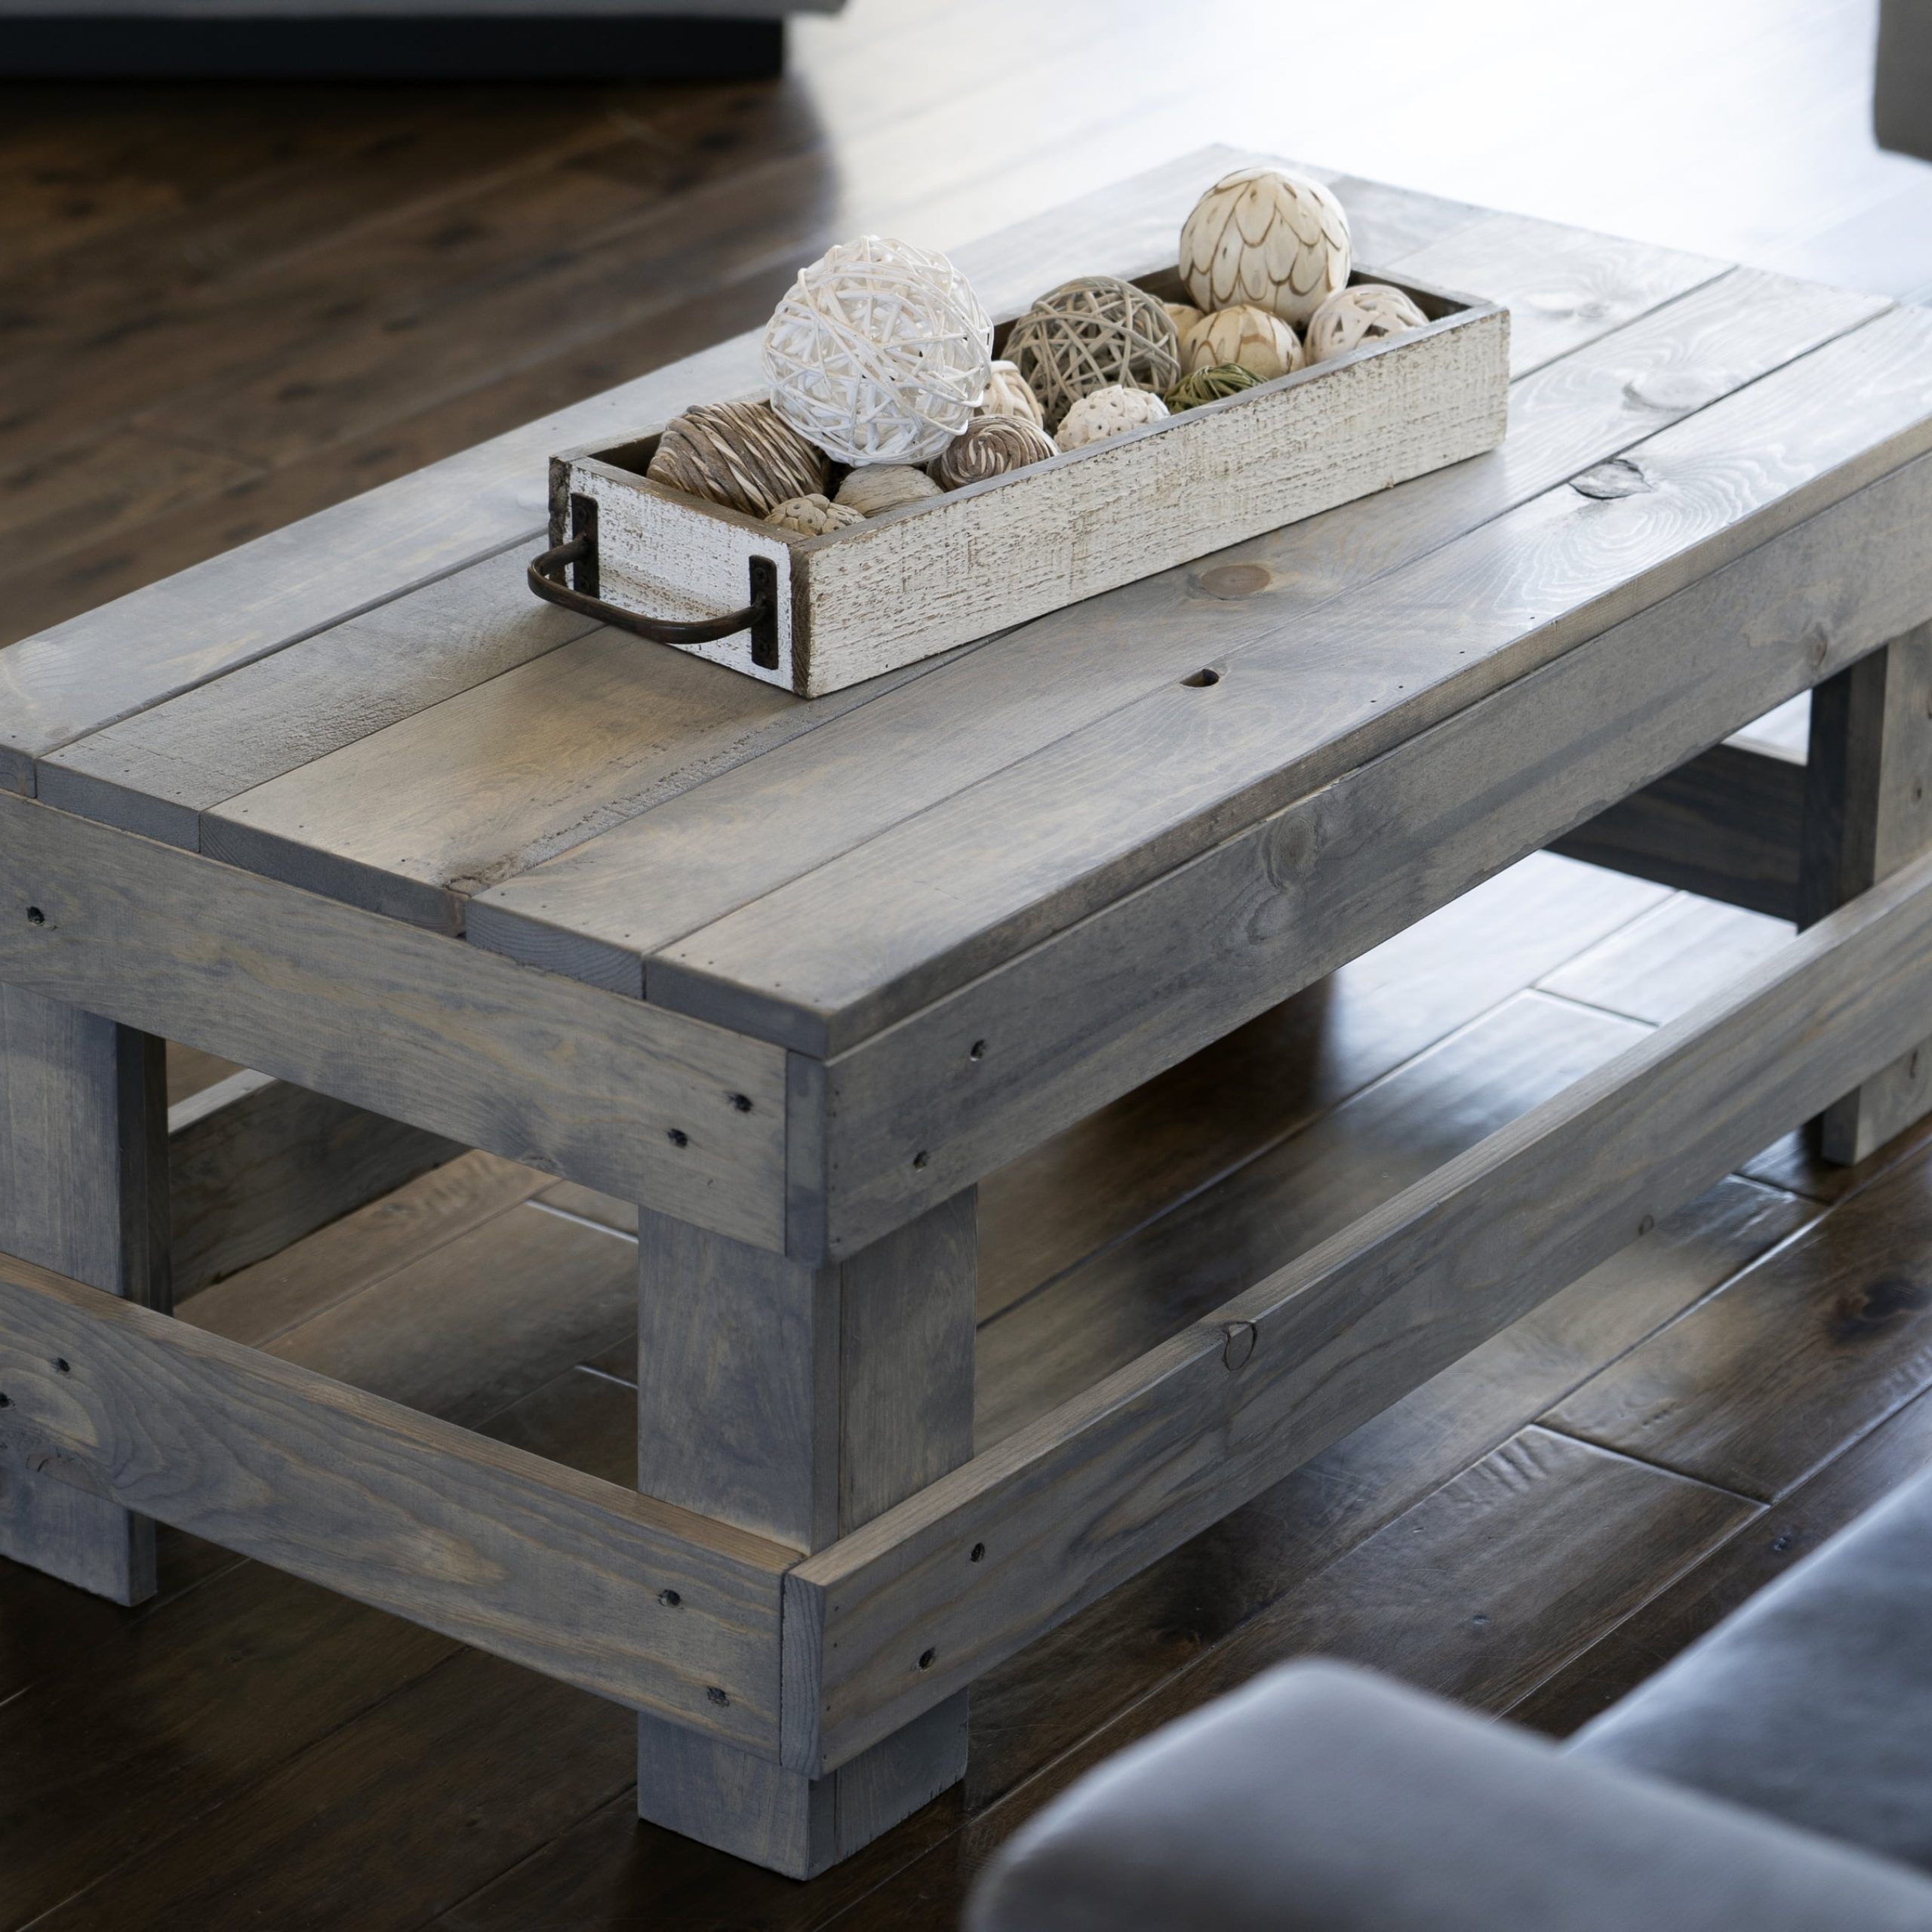 Buy Woven Paths Landmark Pine Solid Wood Farmhouse Coffee Table, Gray Inside Woven Paths Coffee Tables (View 7 of 20)